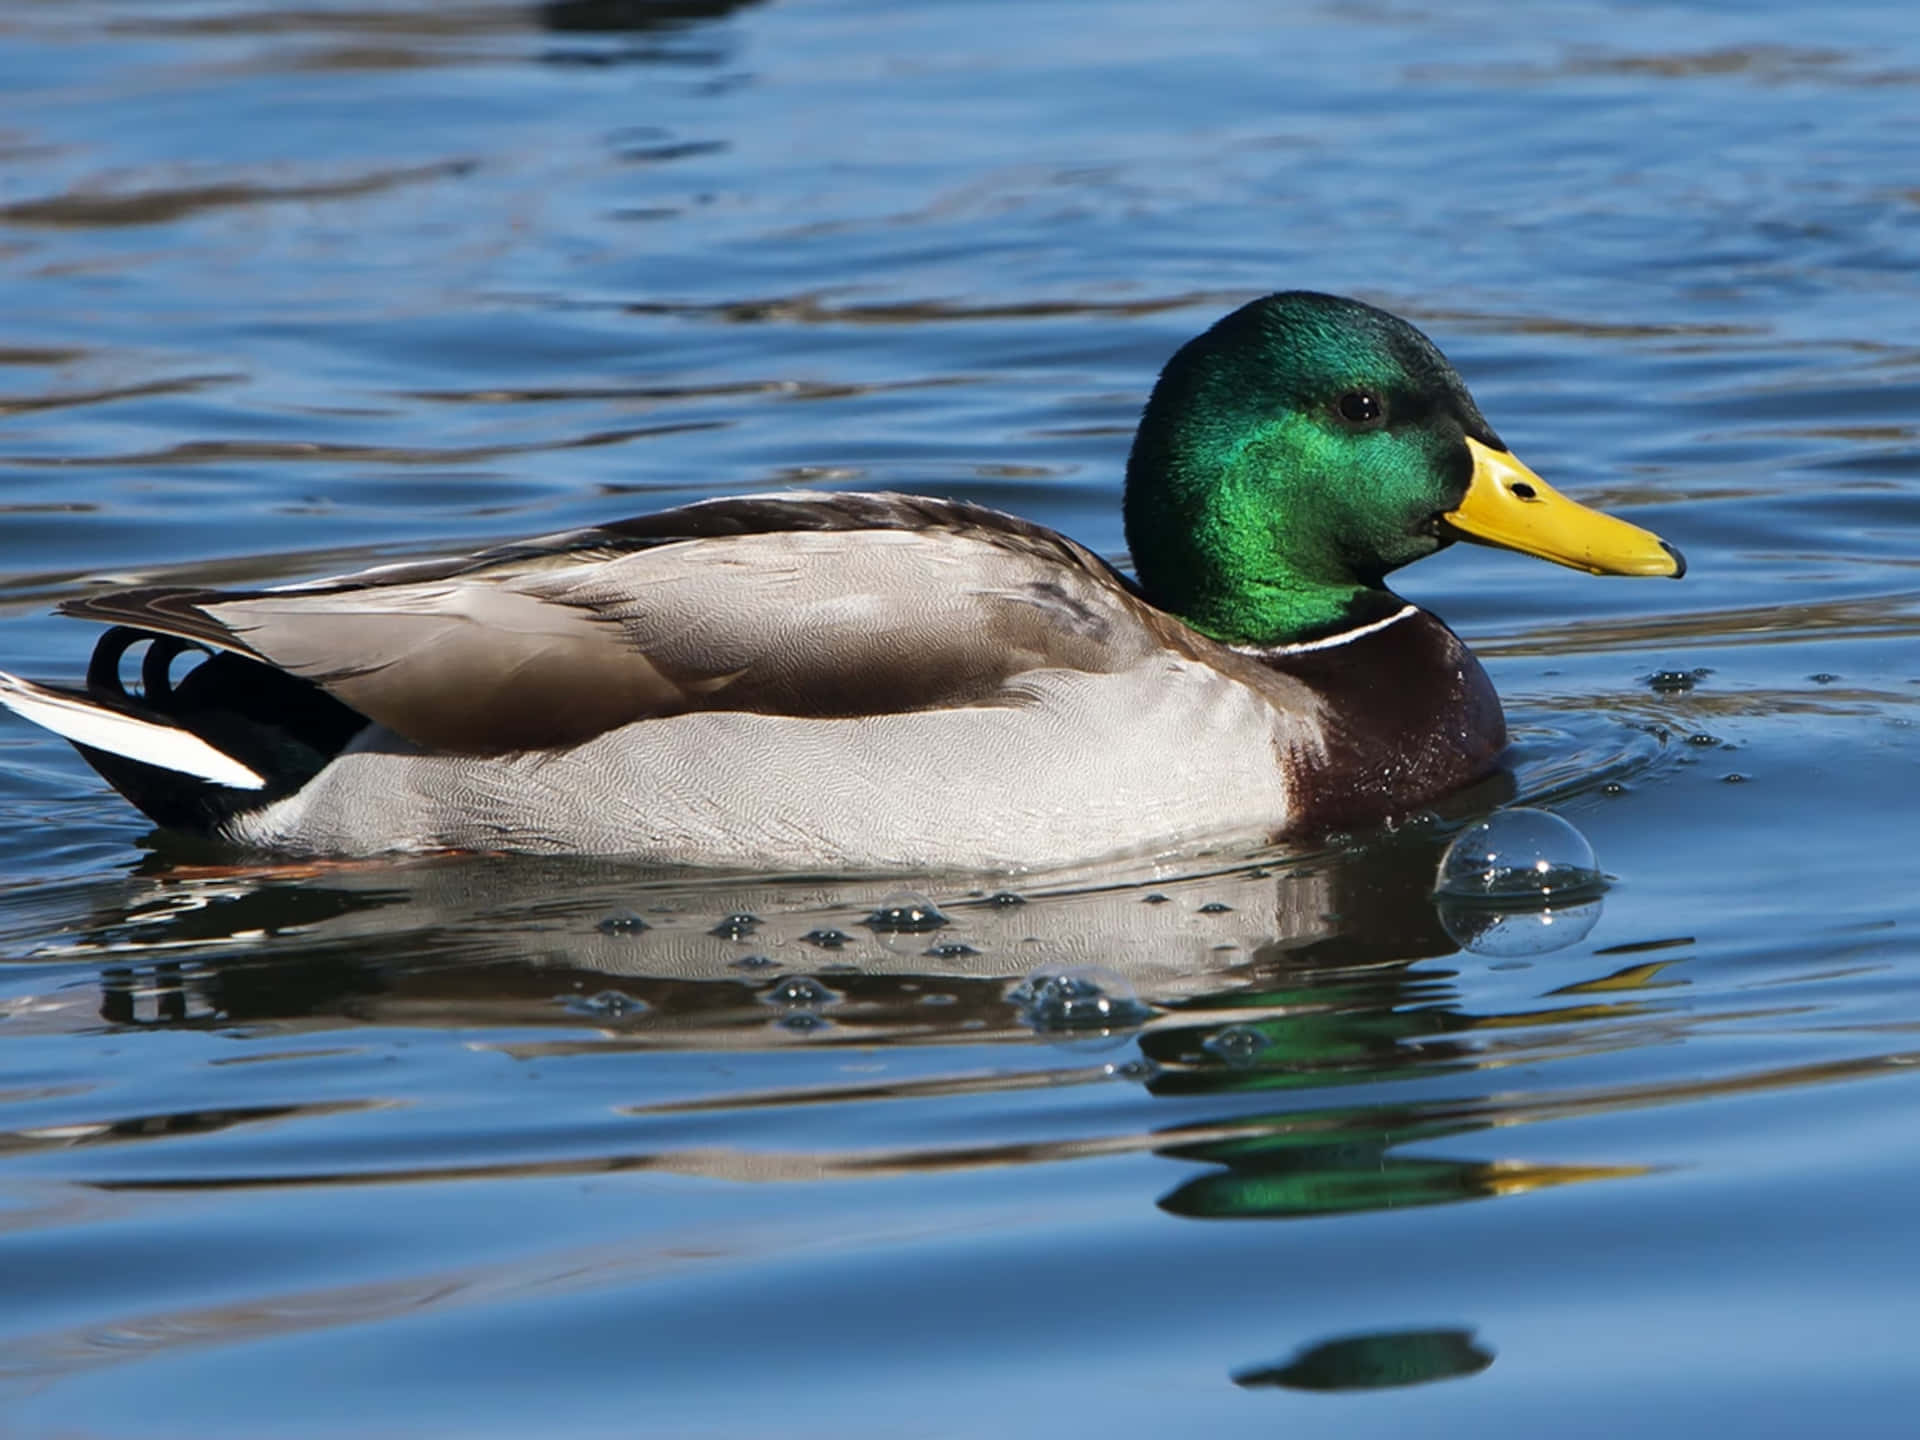 The Warm Reflection of a Male Duck